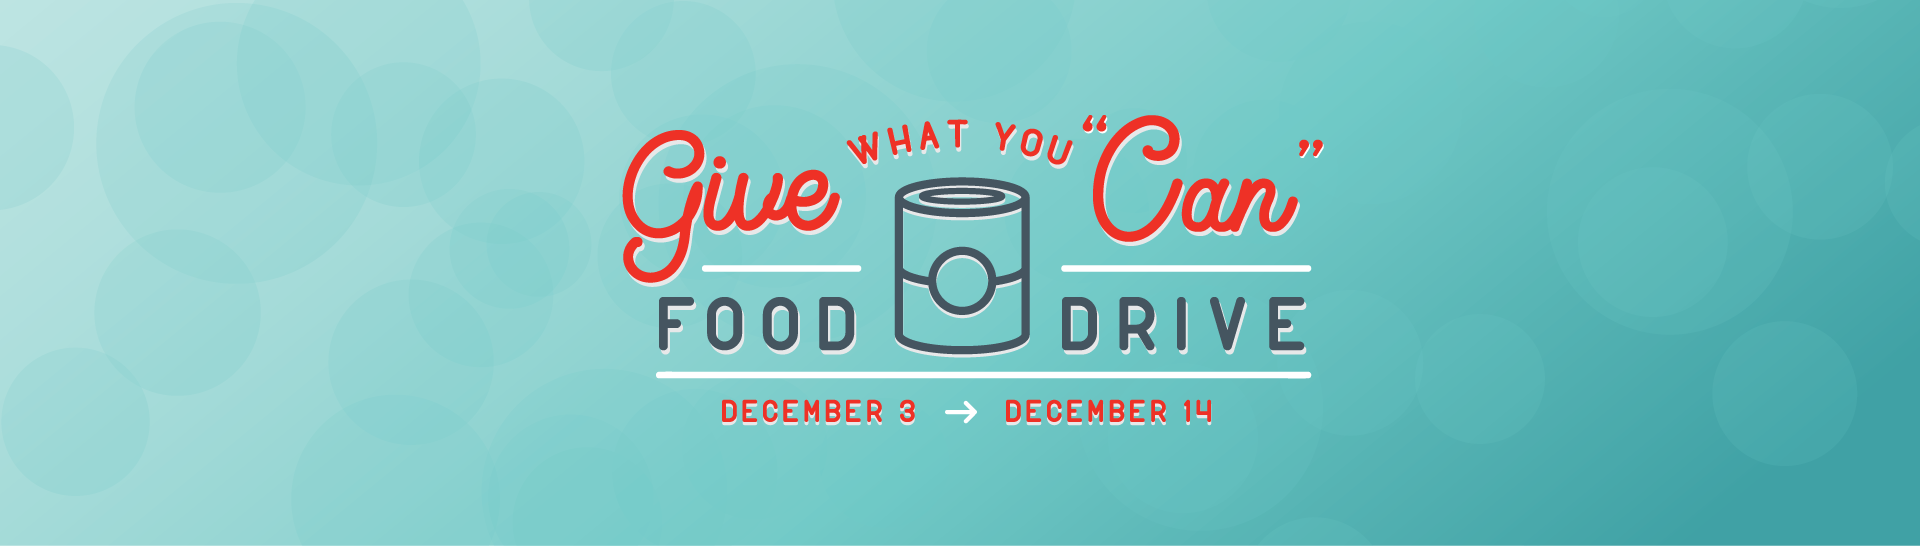 Give What You "Can" Food Drive